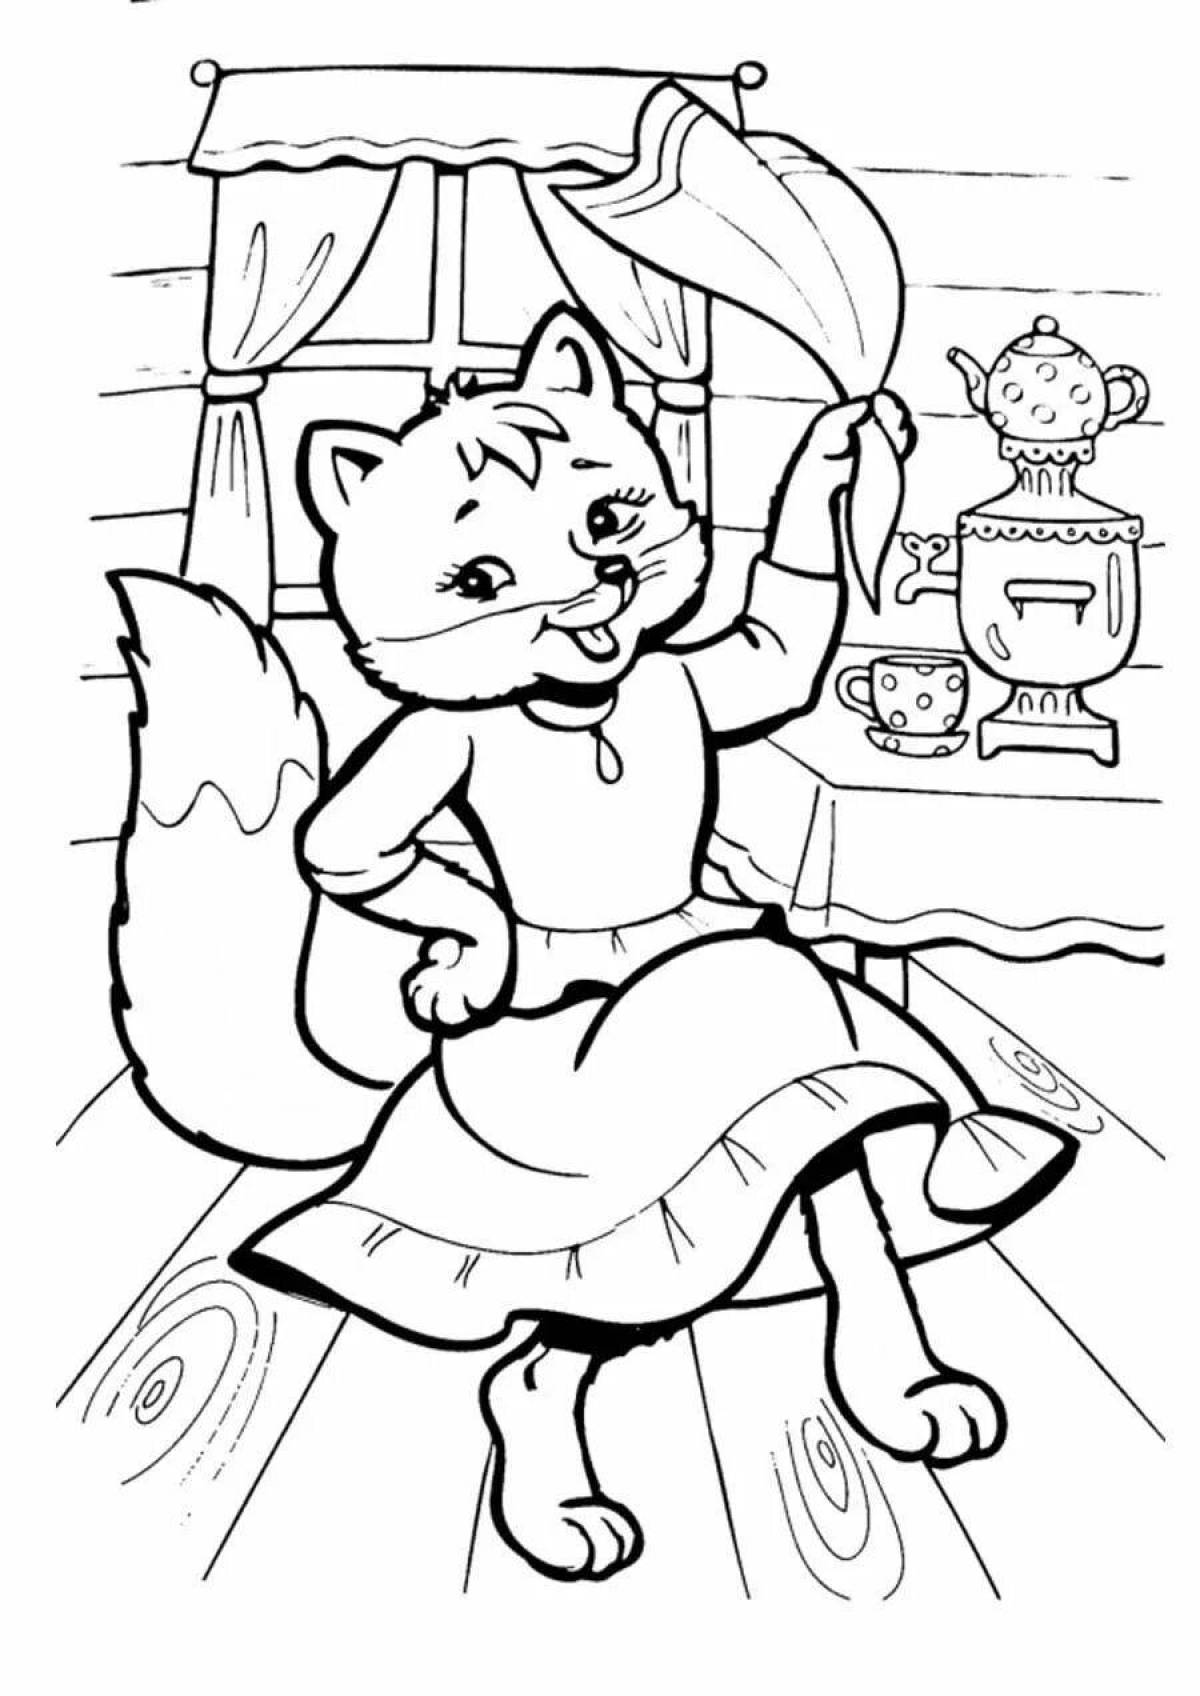 Coloring page dazzling hare hut